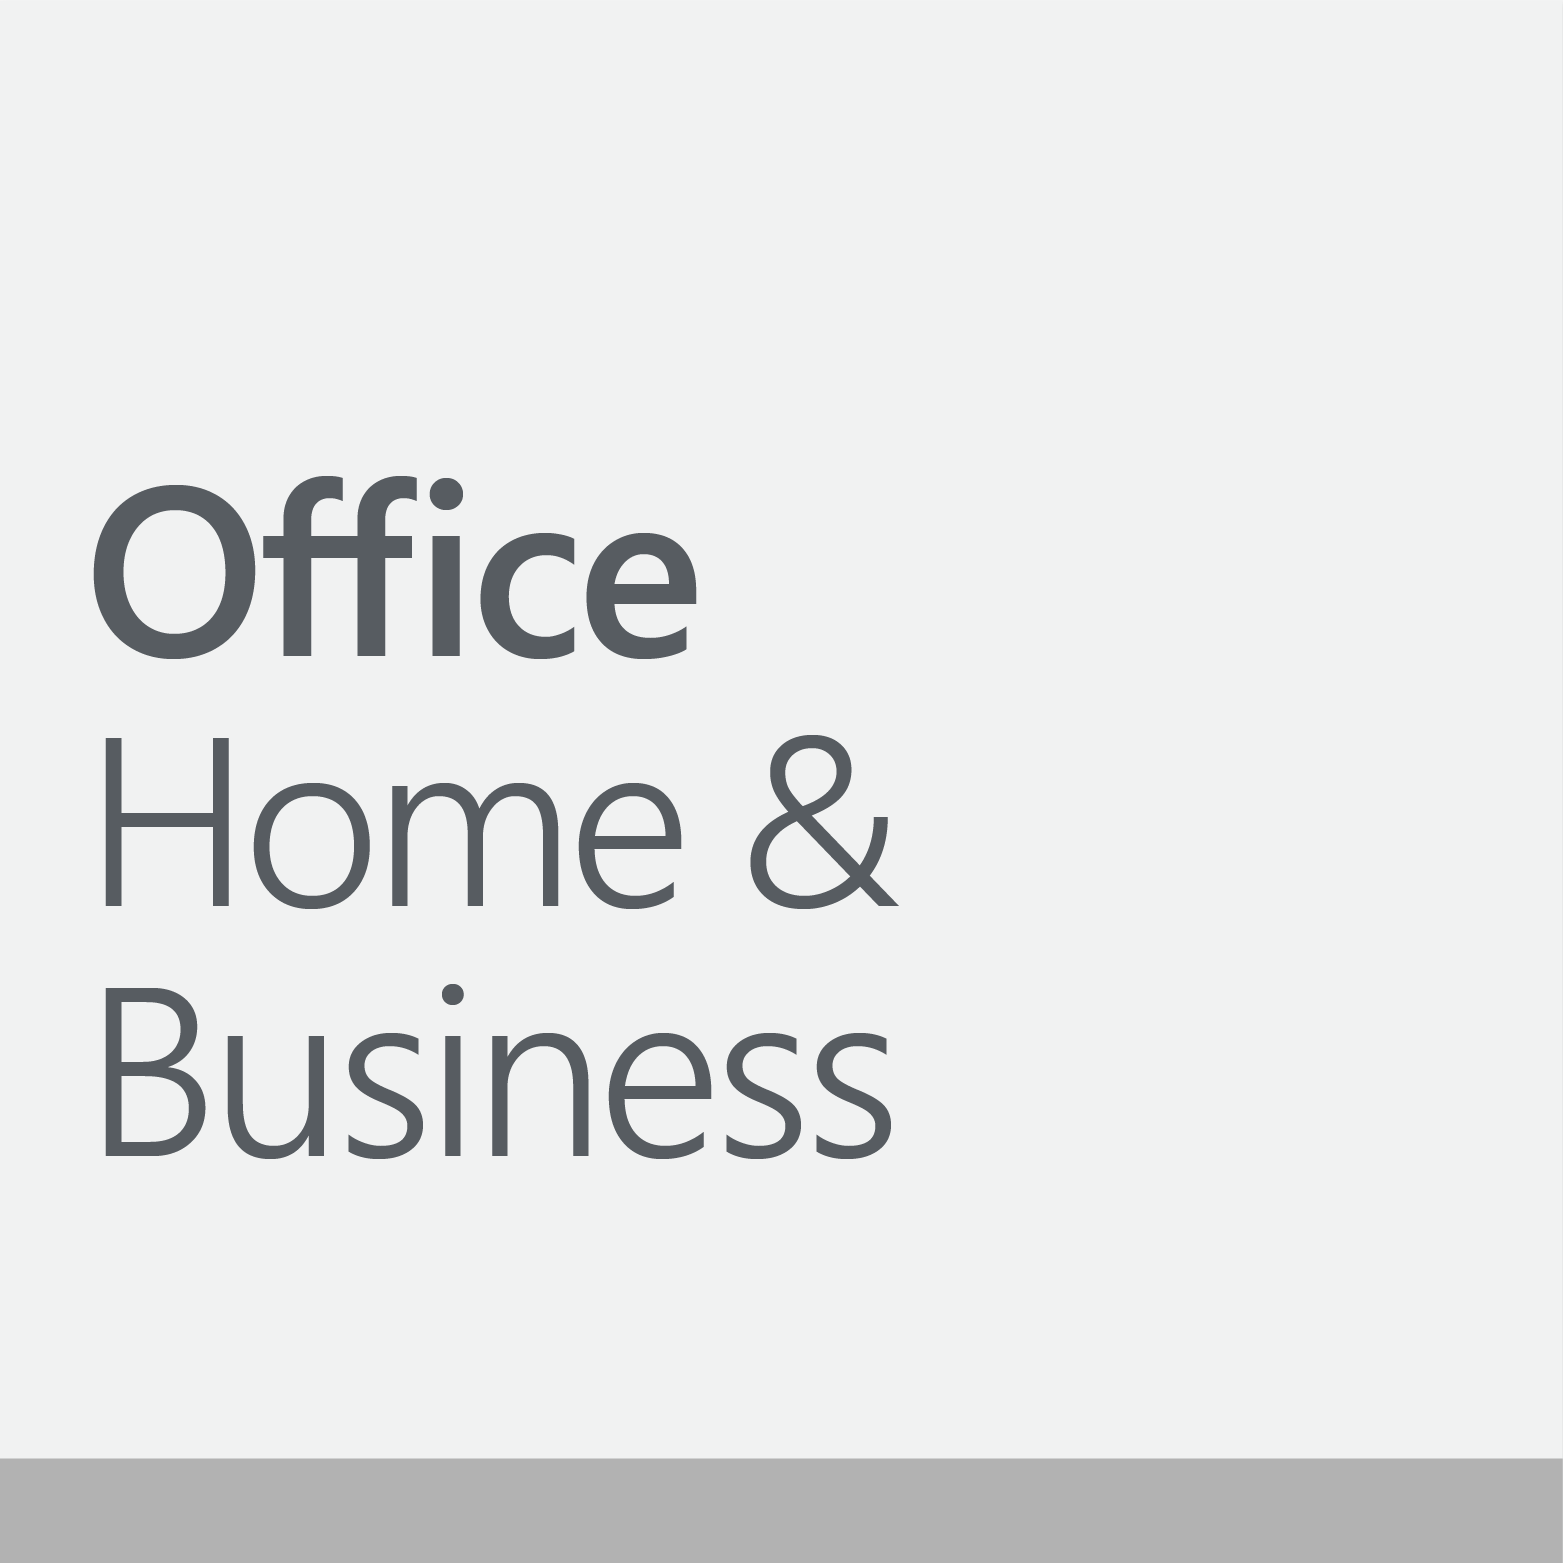 Office Home ＆ Business 2019　OFFICE2019 パソコンソフト 格安 セール